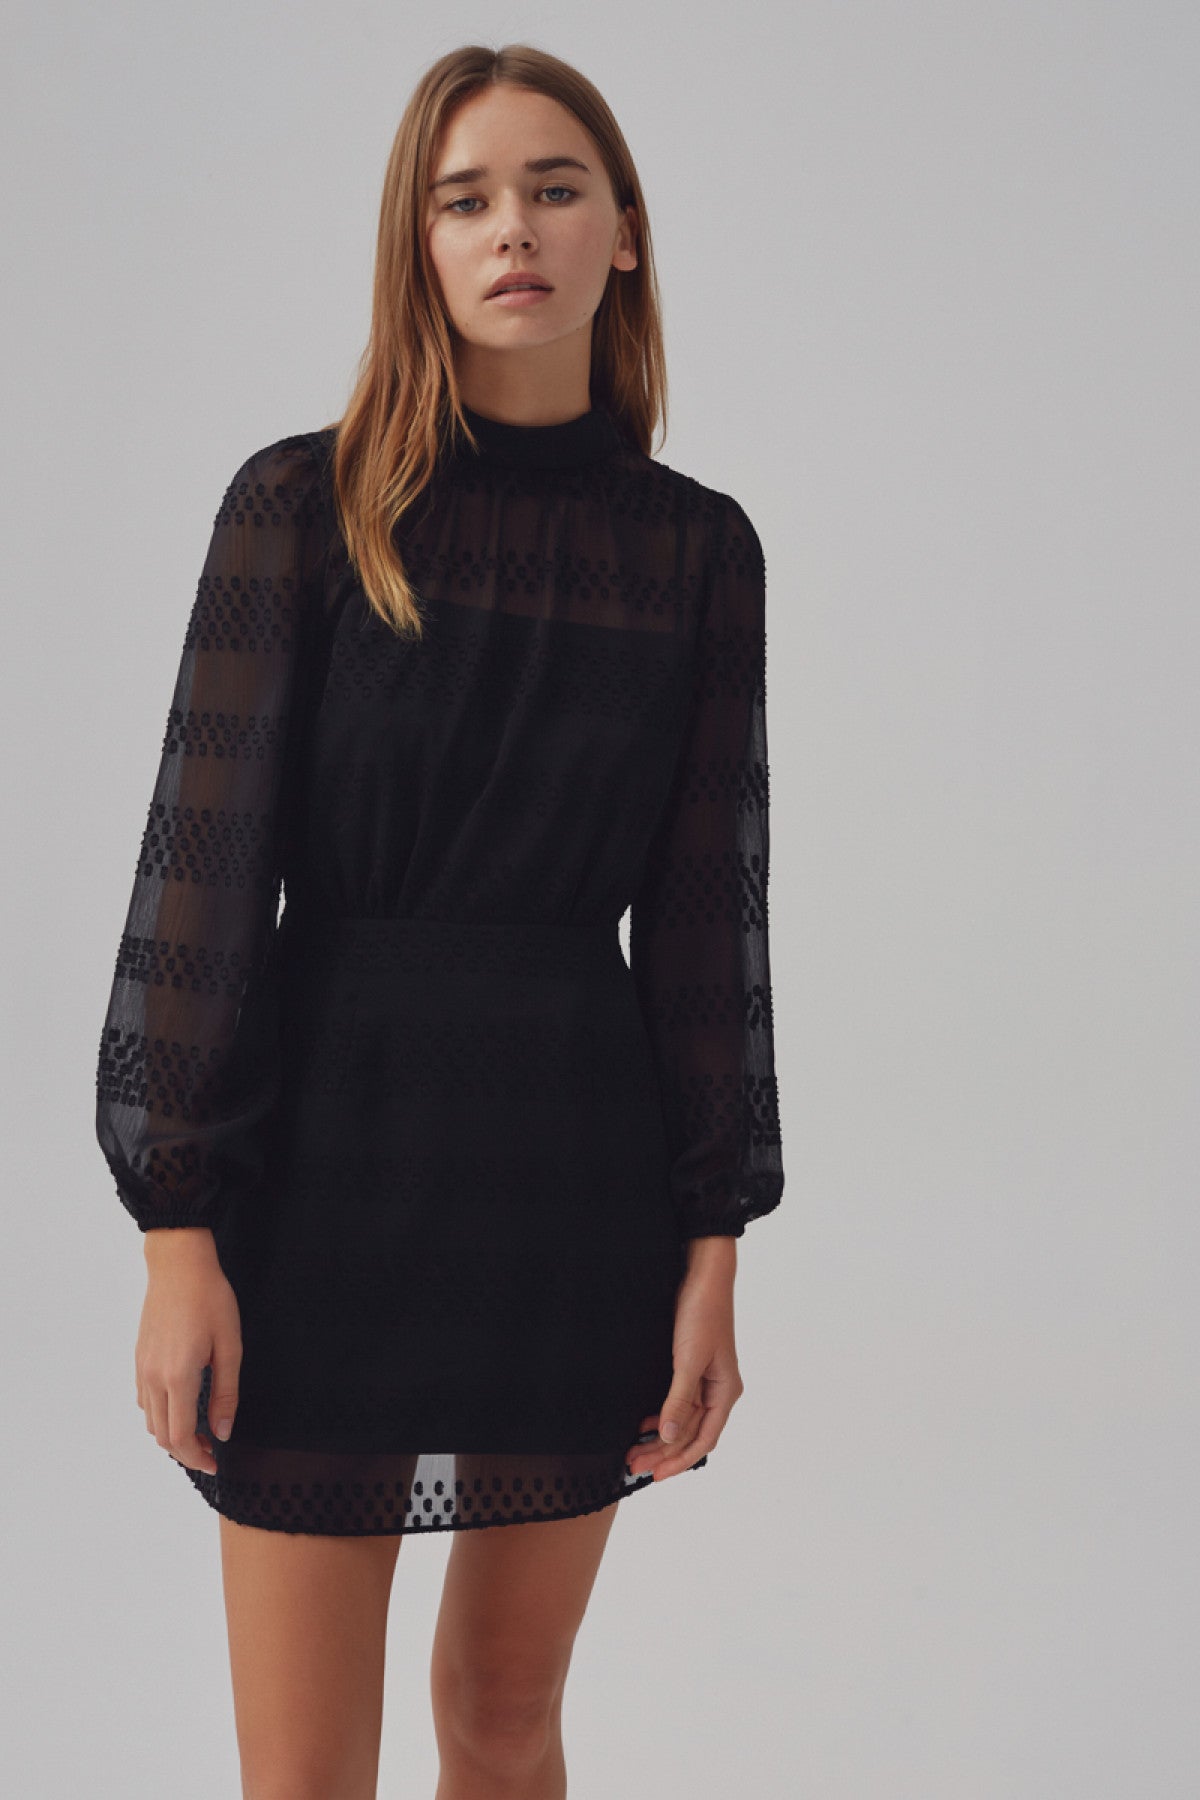 THE FIFTH | VOLTAGE DRESS black#N# – THE FIFTH LABEL